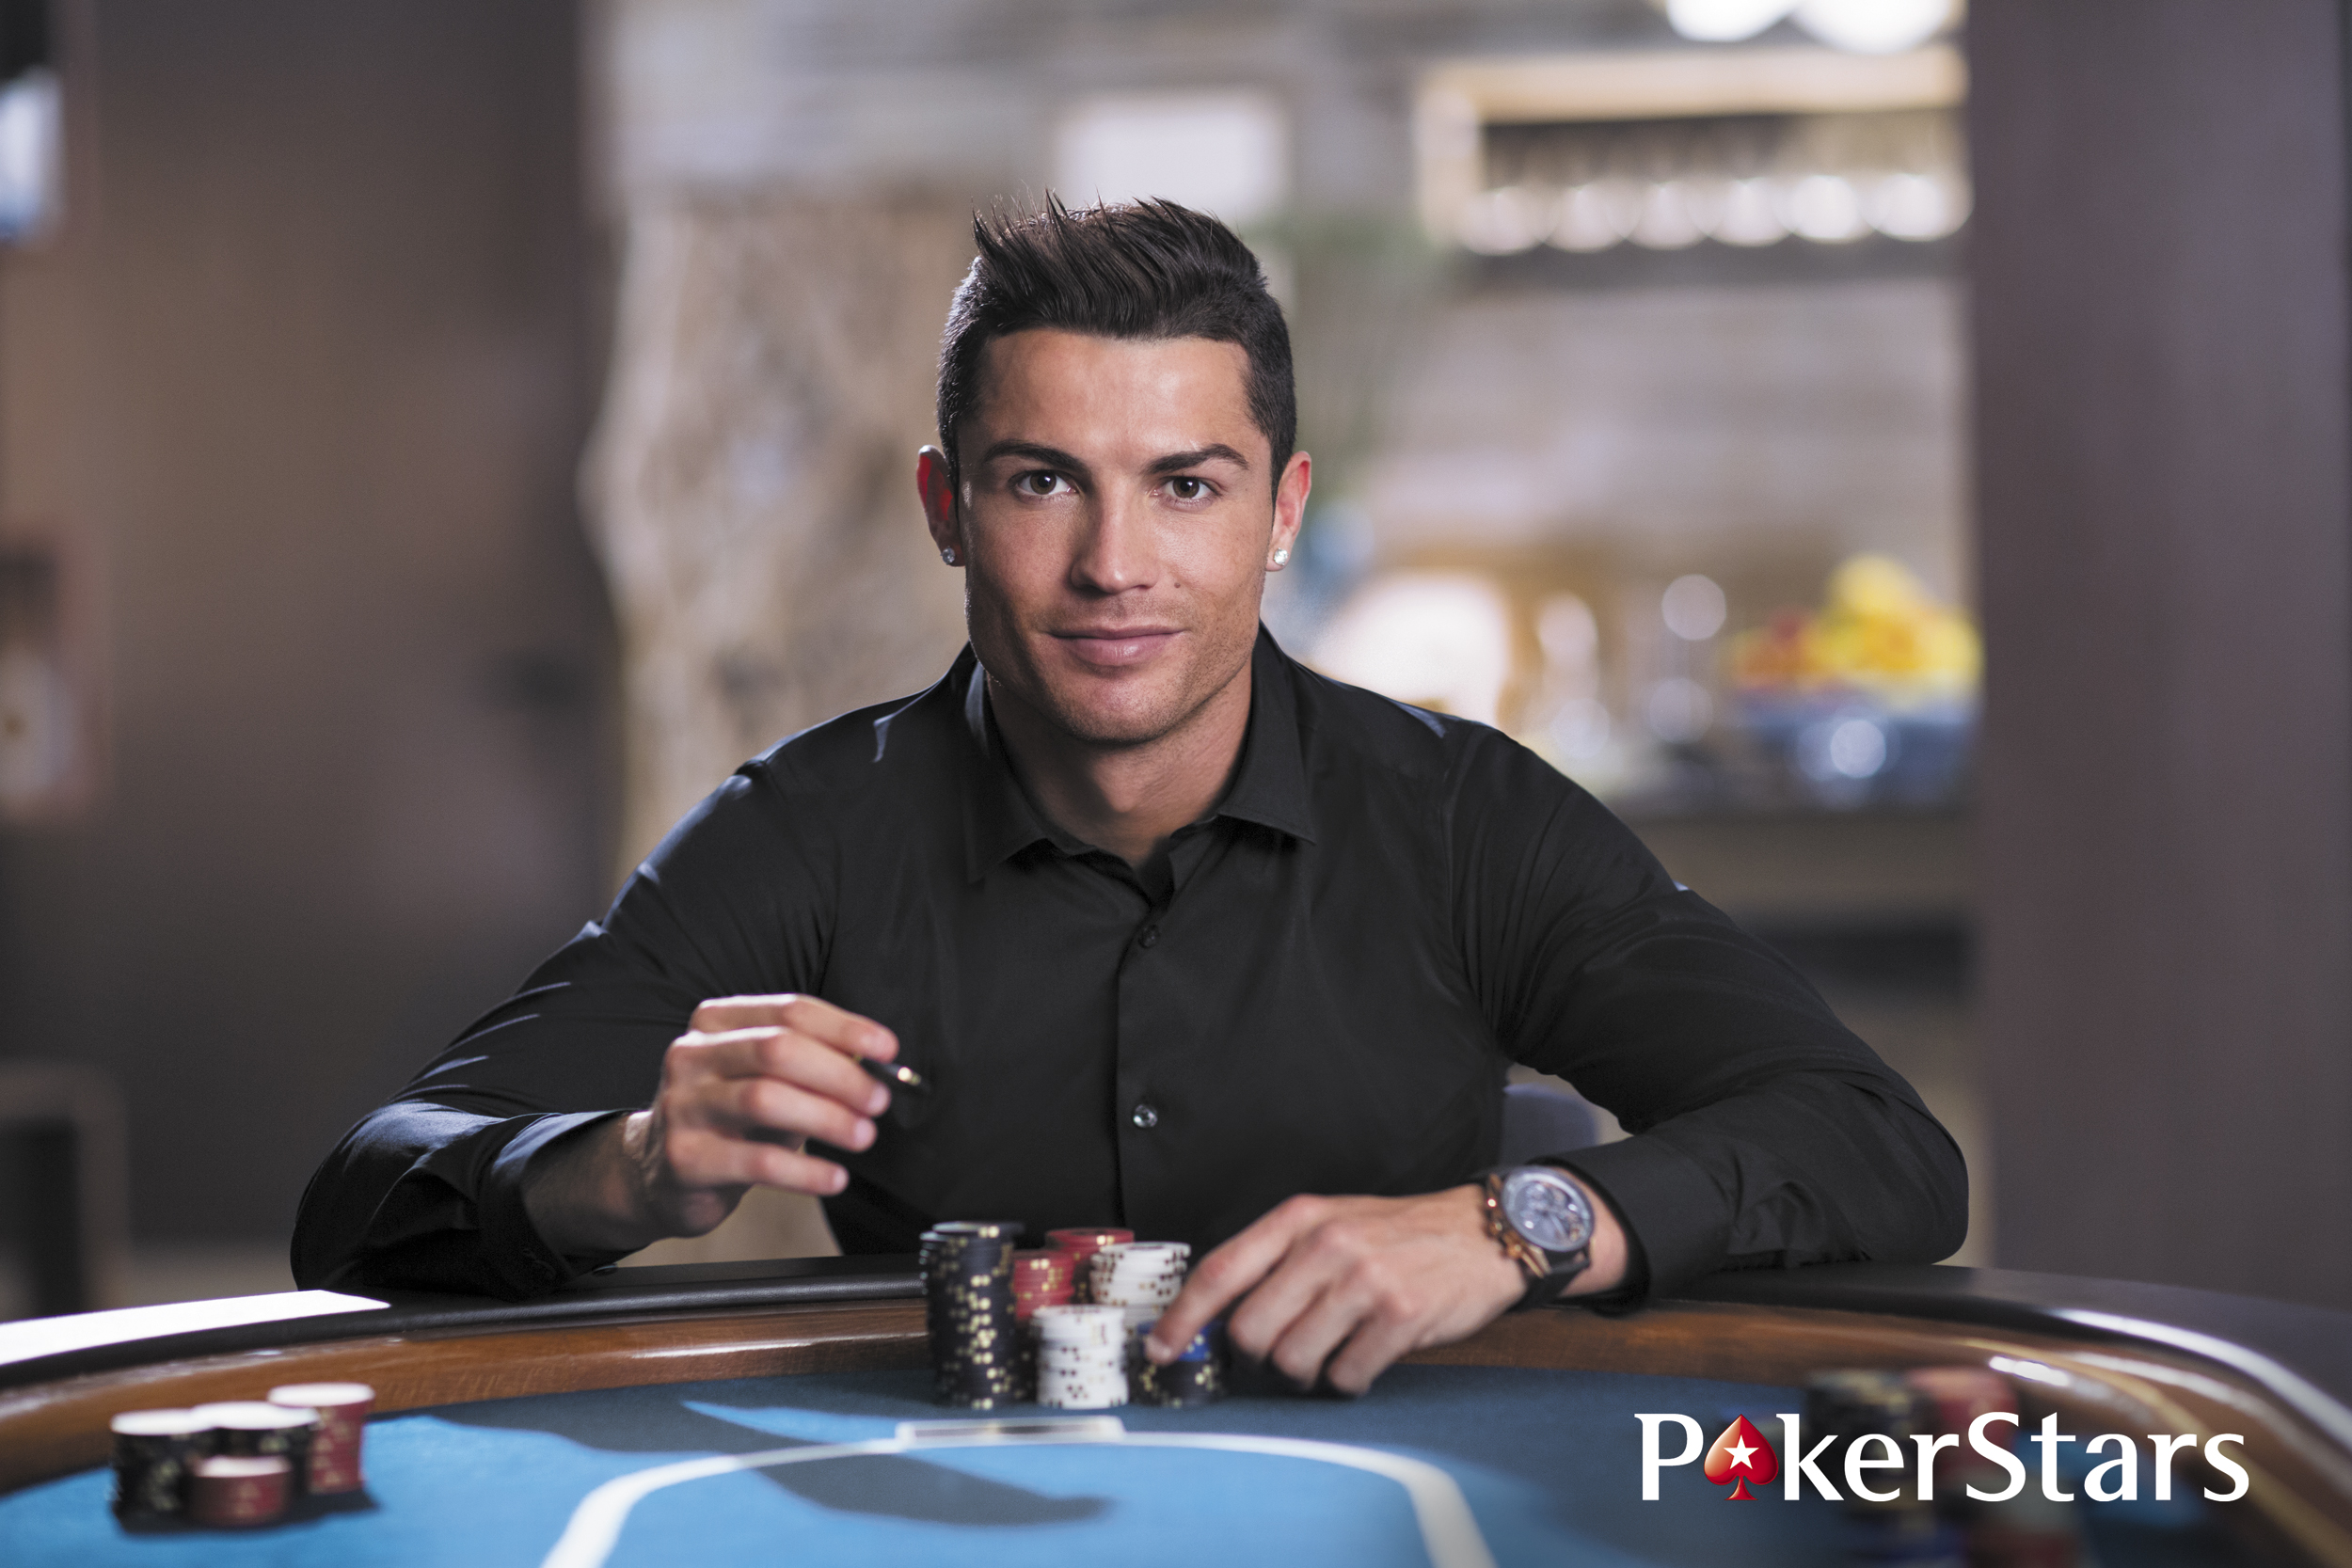 How Are Football Players Changing The Nature of Poker?